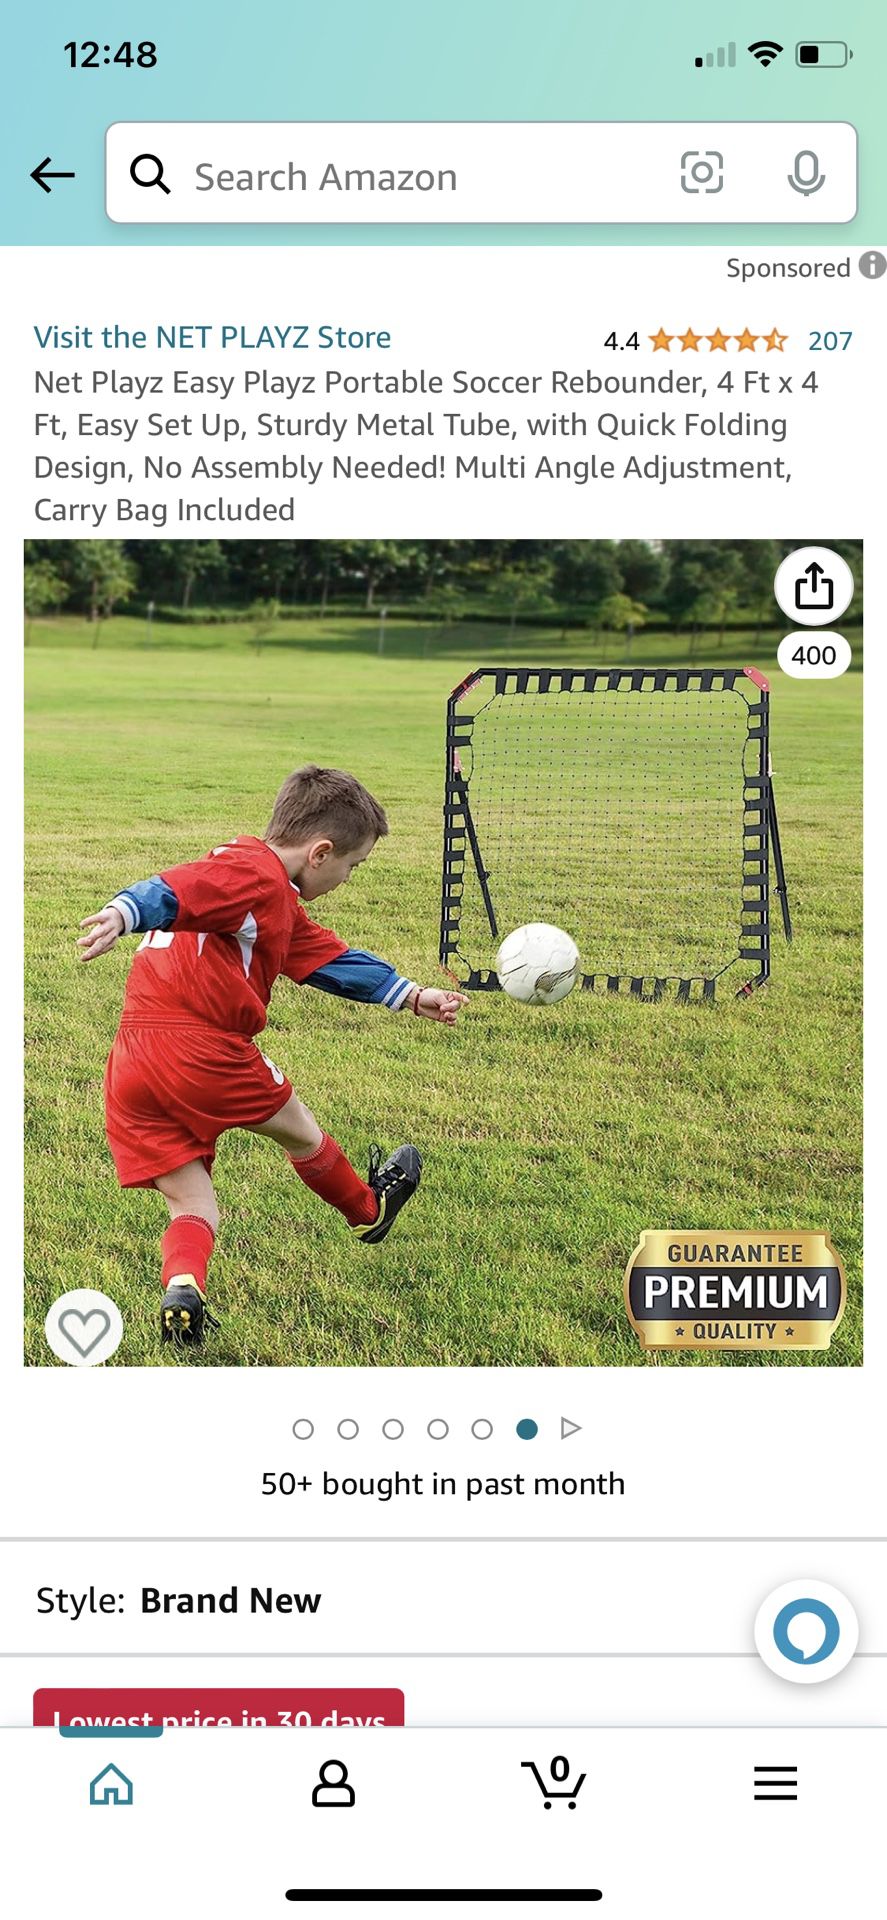 Net Playz Easy Playz Portable Soccer Rebounder, 4 Ft x 4 Ft, Easy Set Up,  Sturdy Metal Tube, with Quick Folding Design, No Assembly Needed! Multi